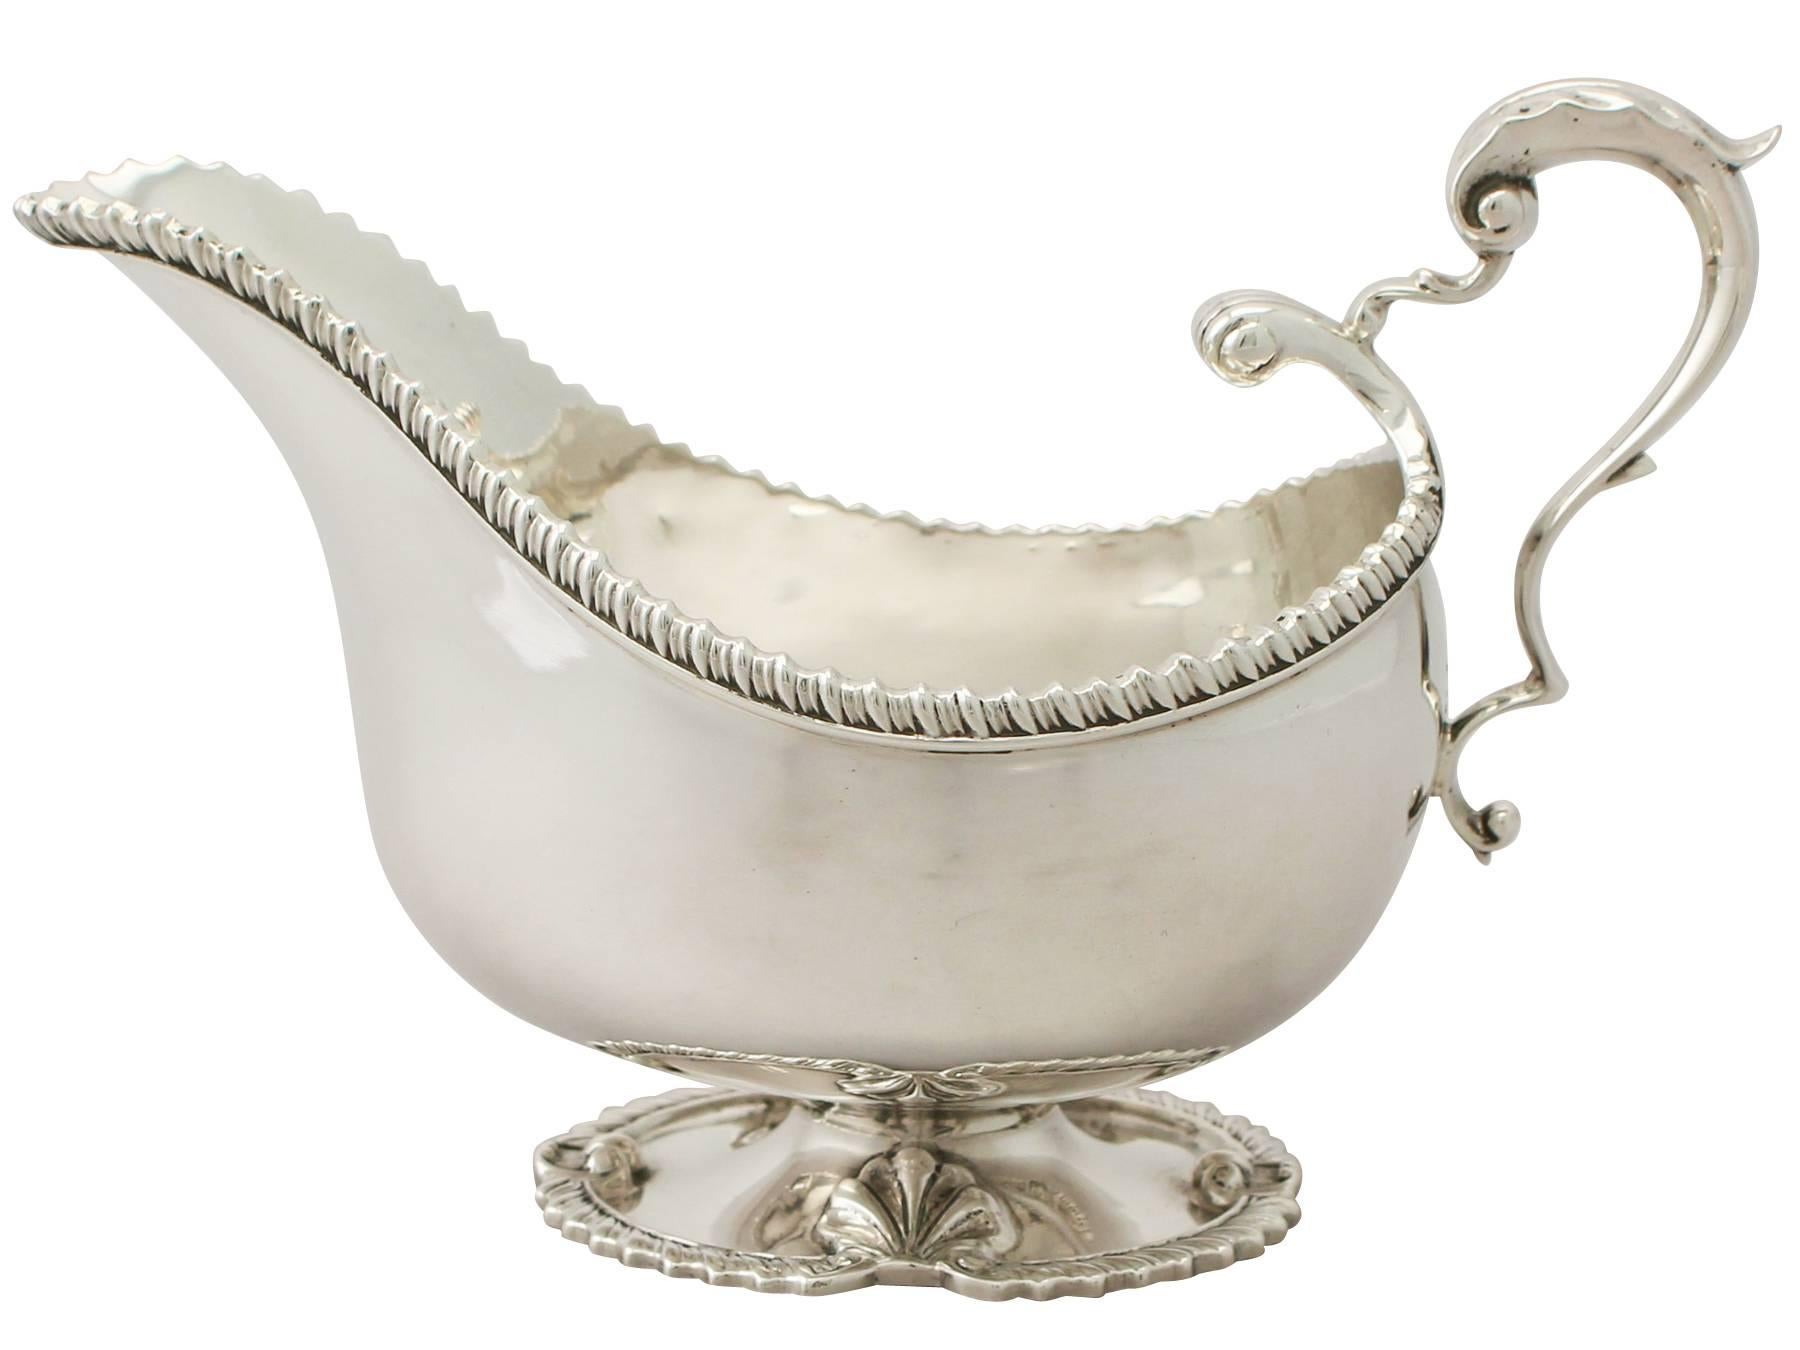 Early 20th Century Antique Sterling Silver Sauceboats or Gravy Boats in Regency Style, George V